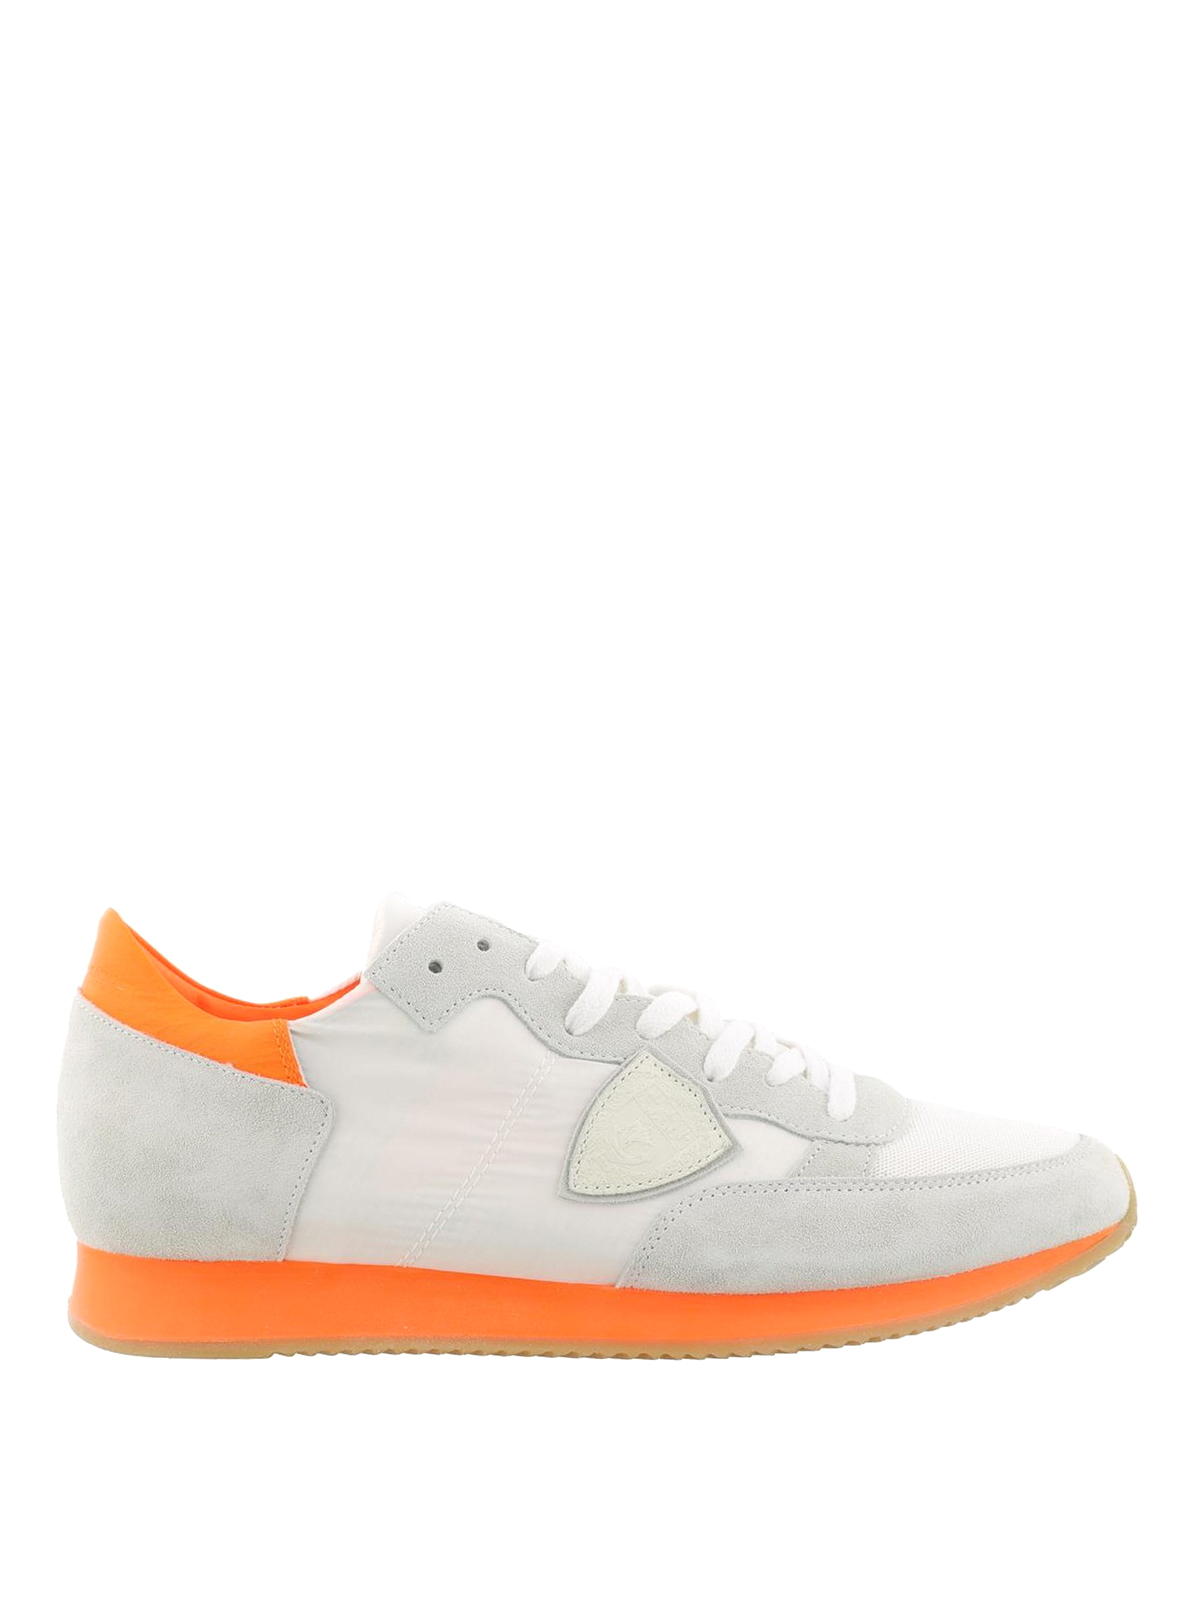 Trainers Philippe Model - Tropez sneakers with orange sole - TRLUNS02